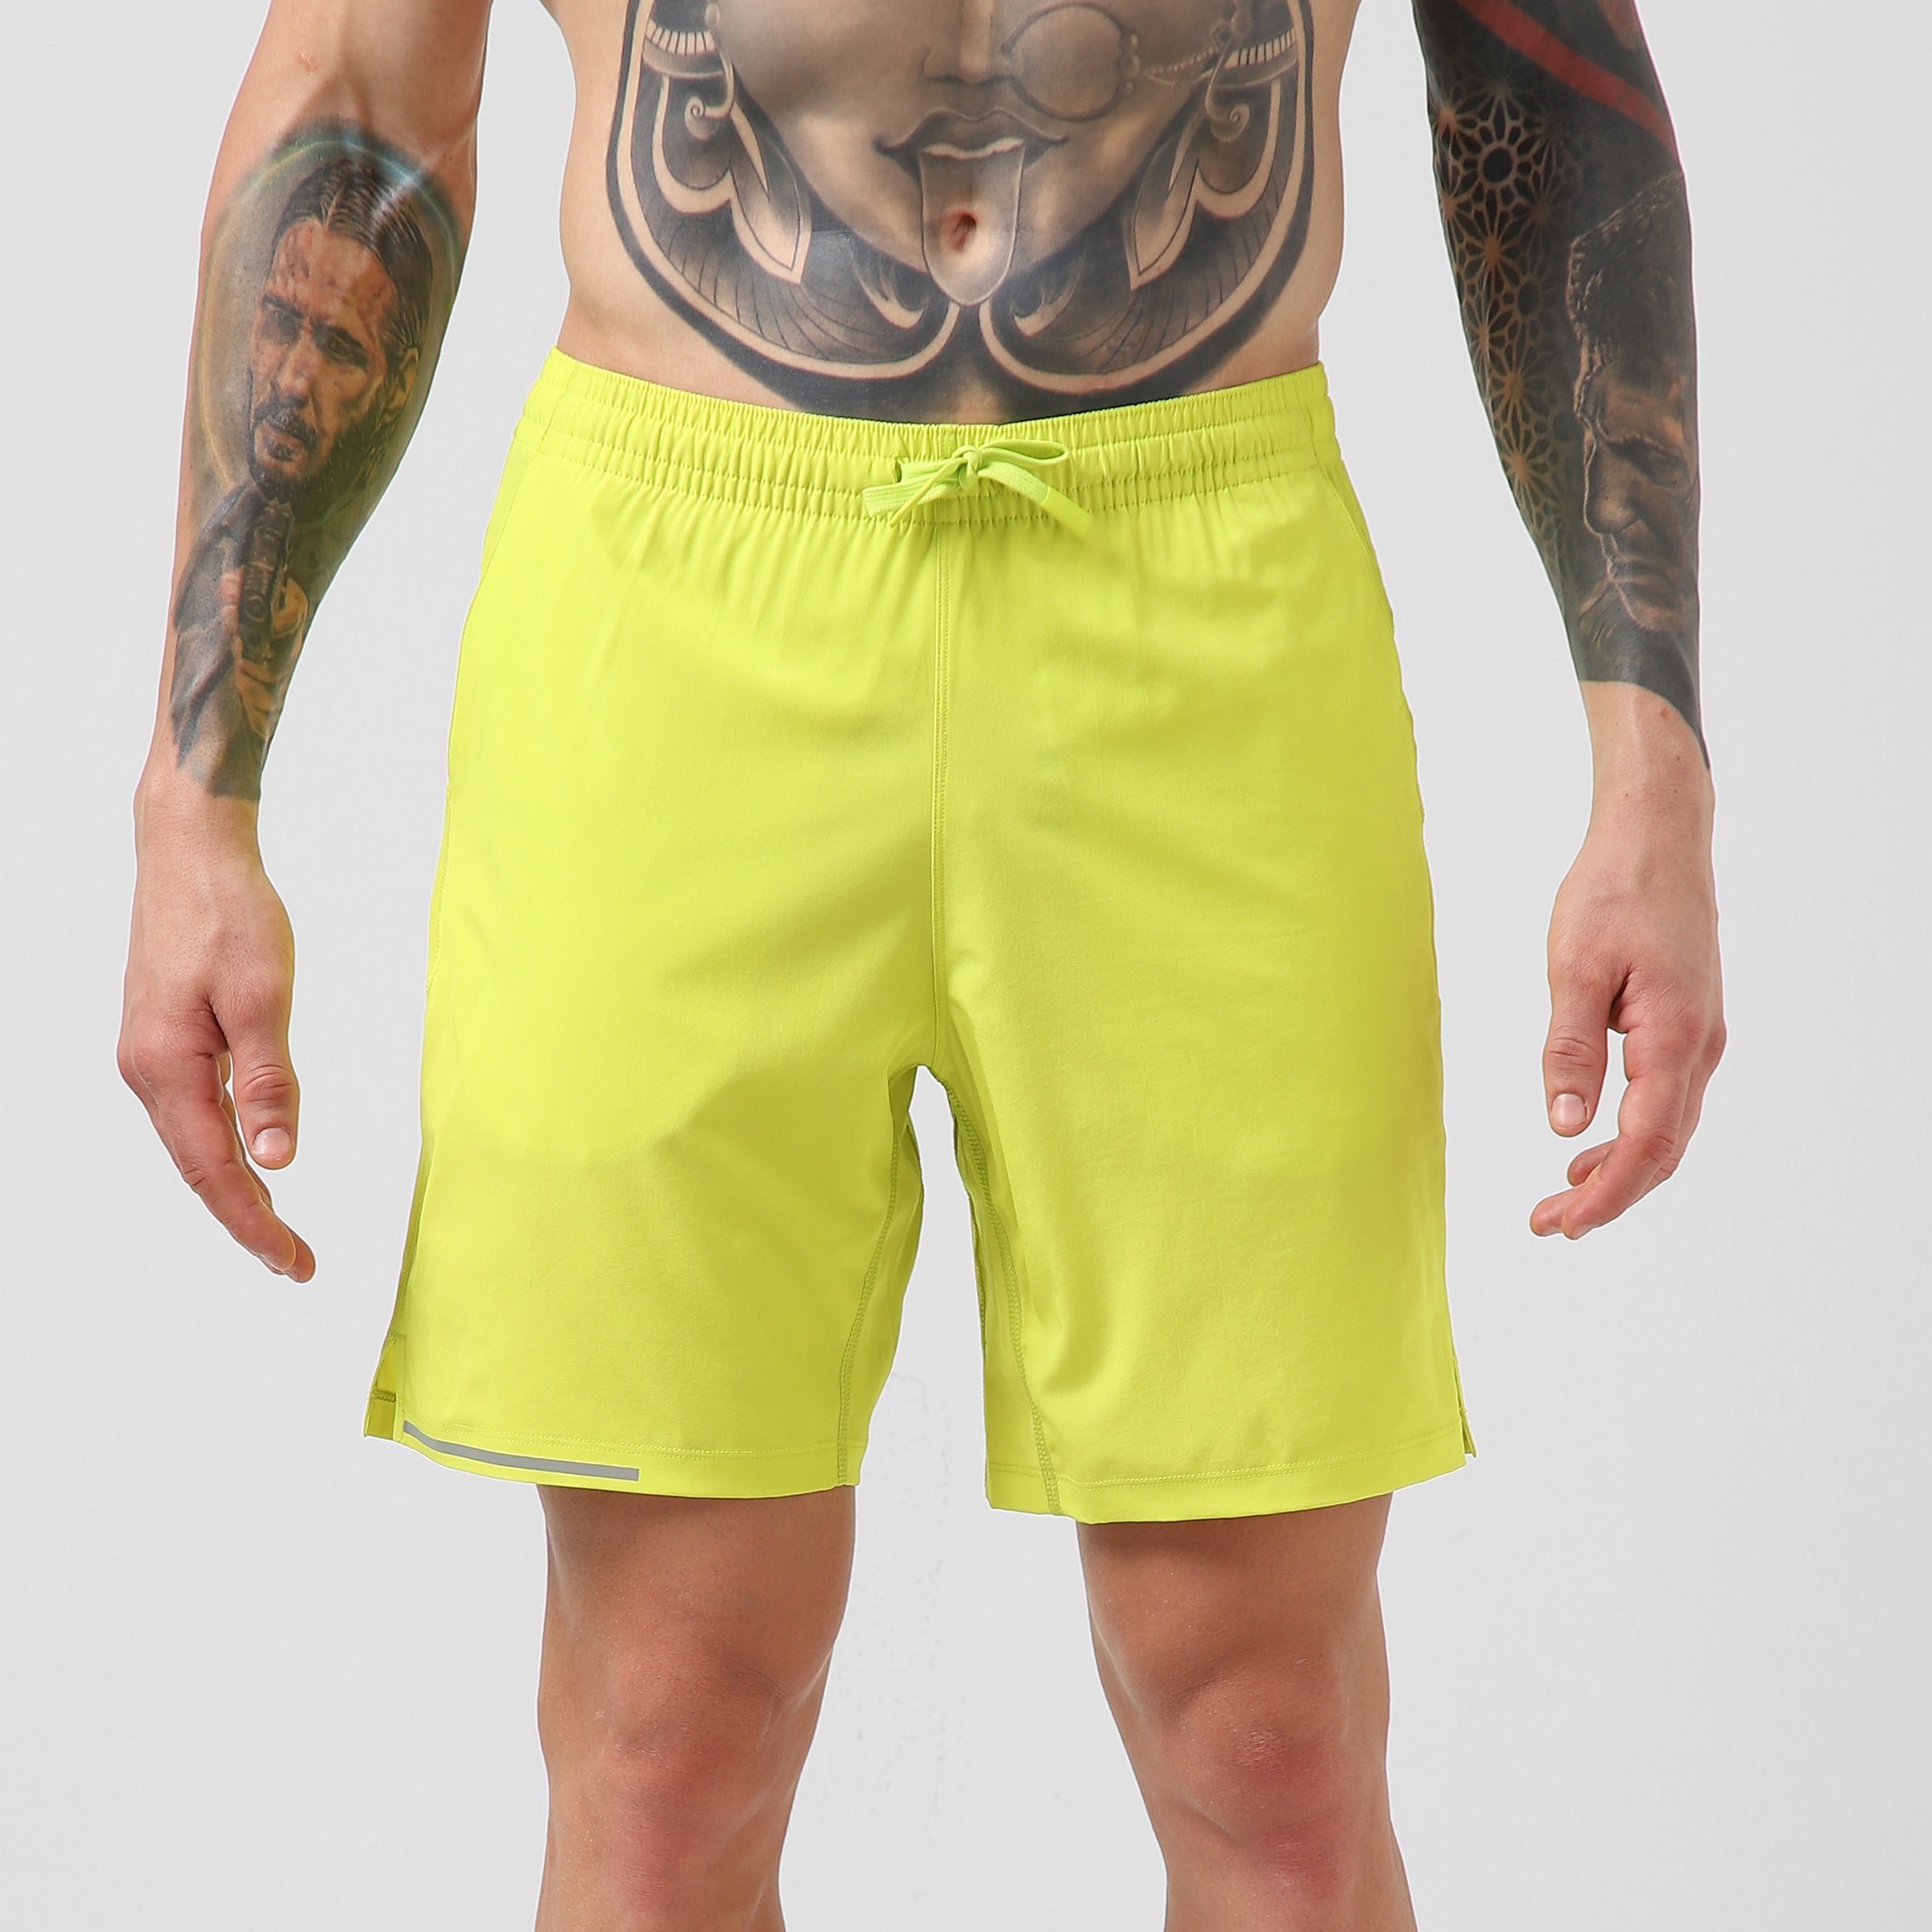 Run Short v2 7" Electric Yellow front on model